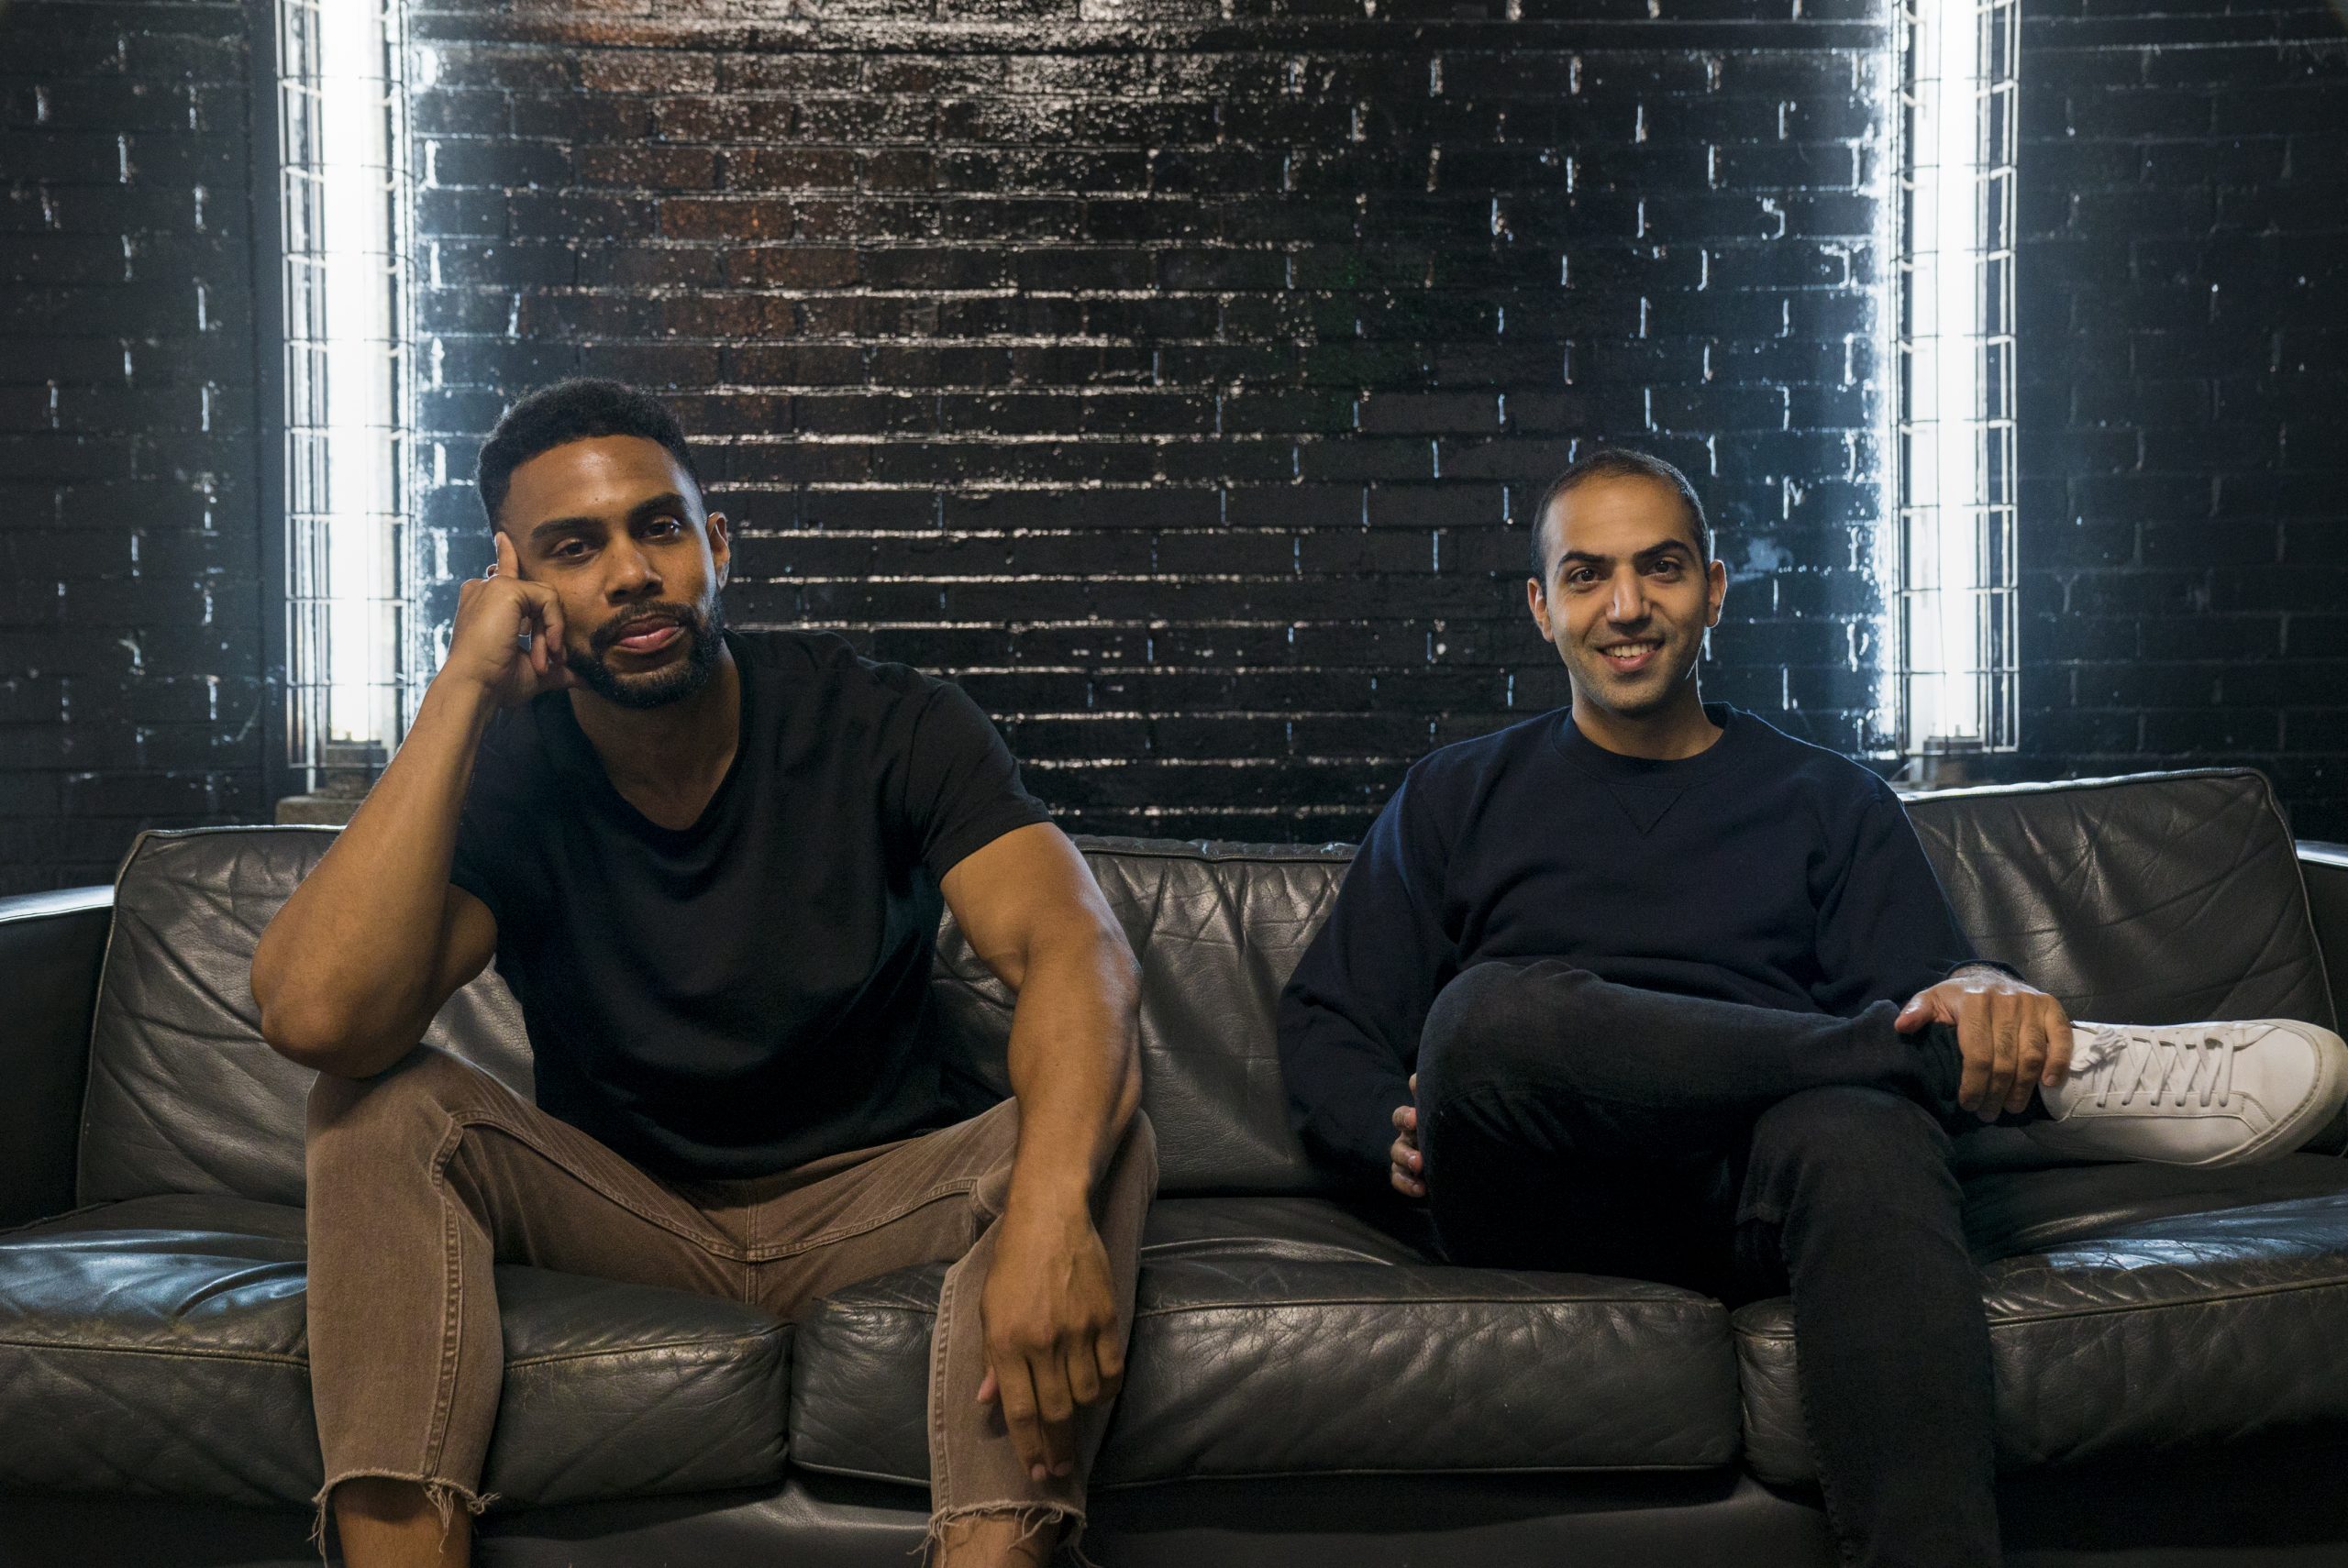 Qube coworking space for creatives raises £1.9m seed round